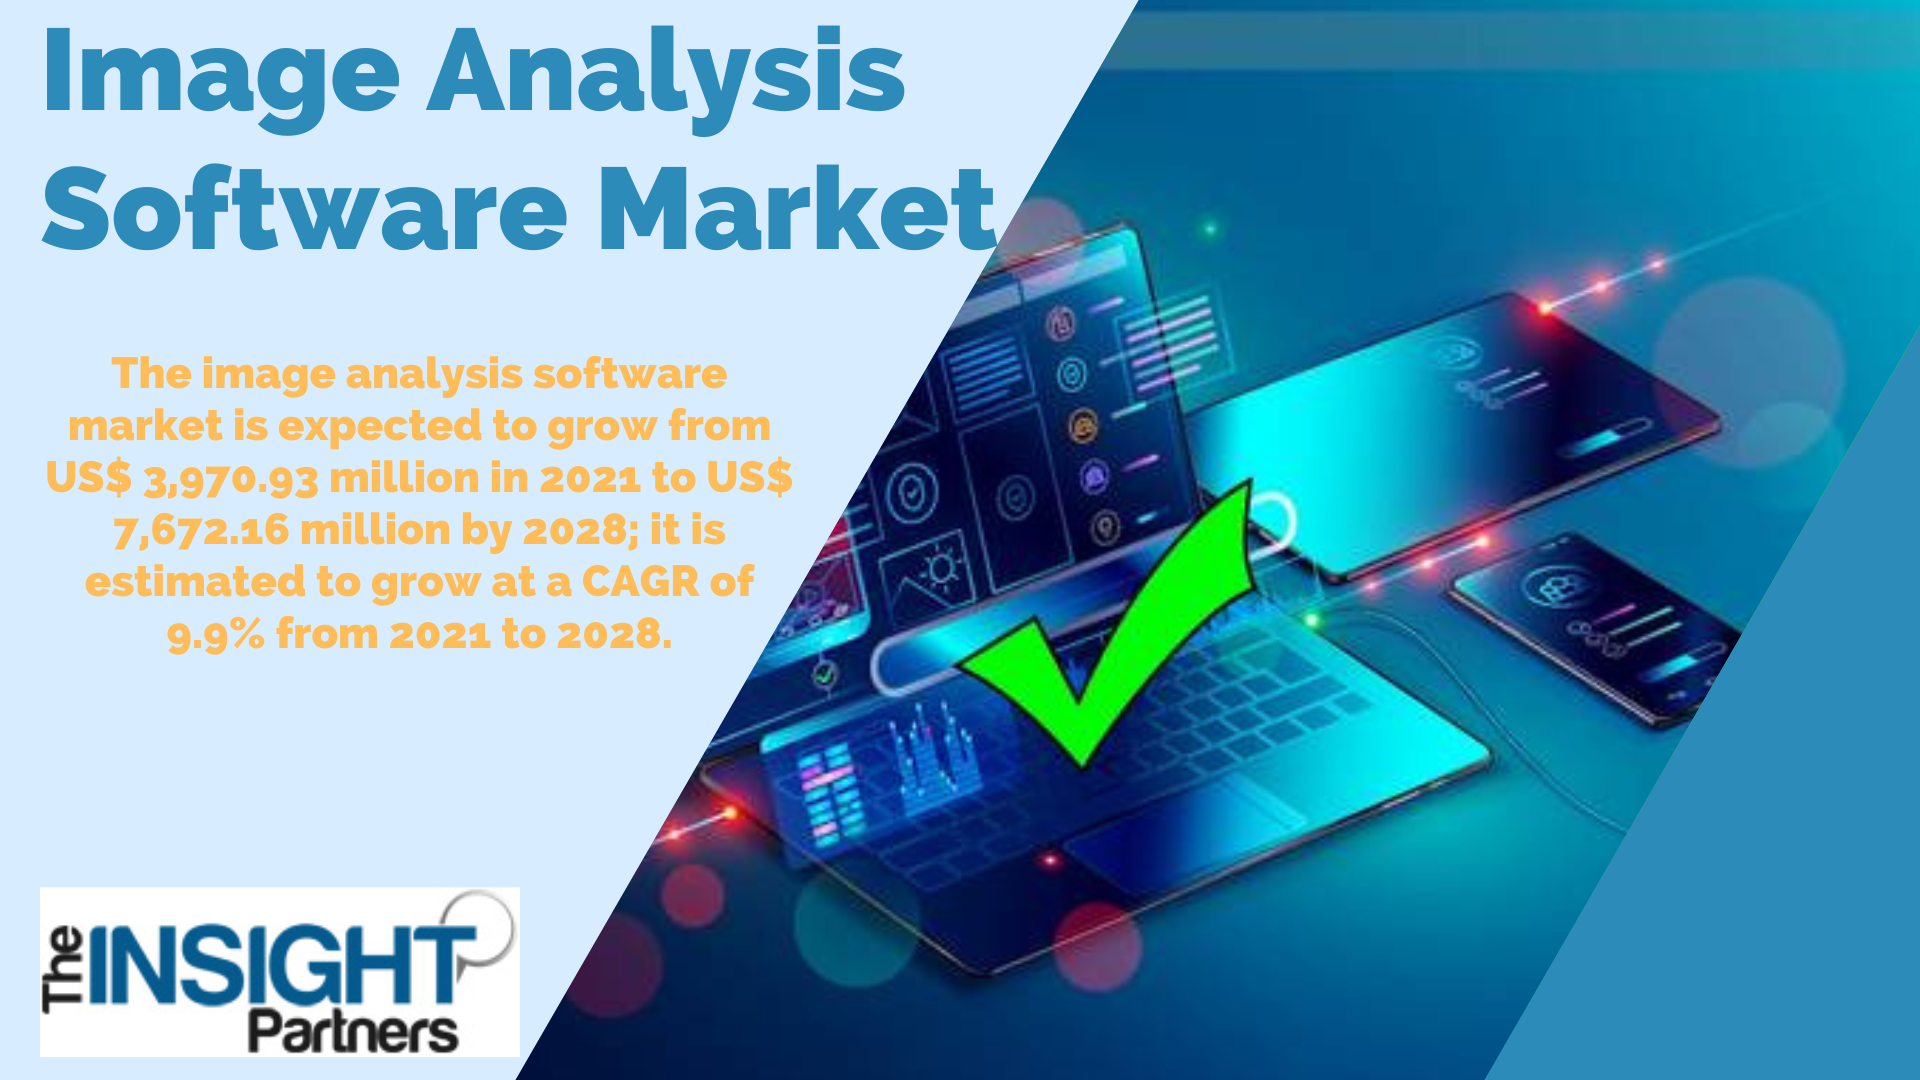 Image Analysis Software Market Report Includes Dynamics, Products, and Application 2021 – 2028